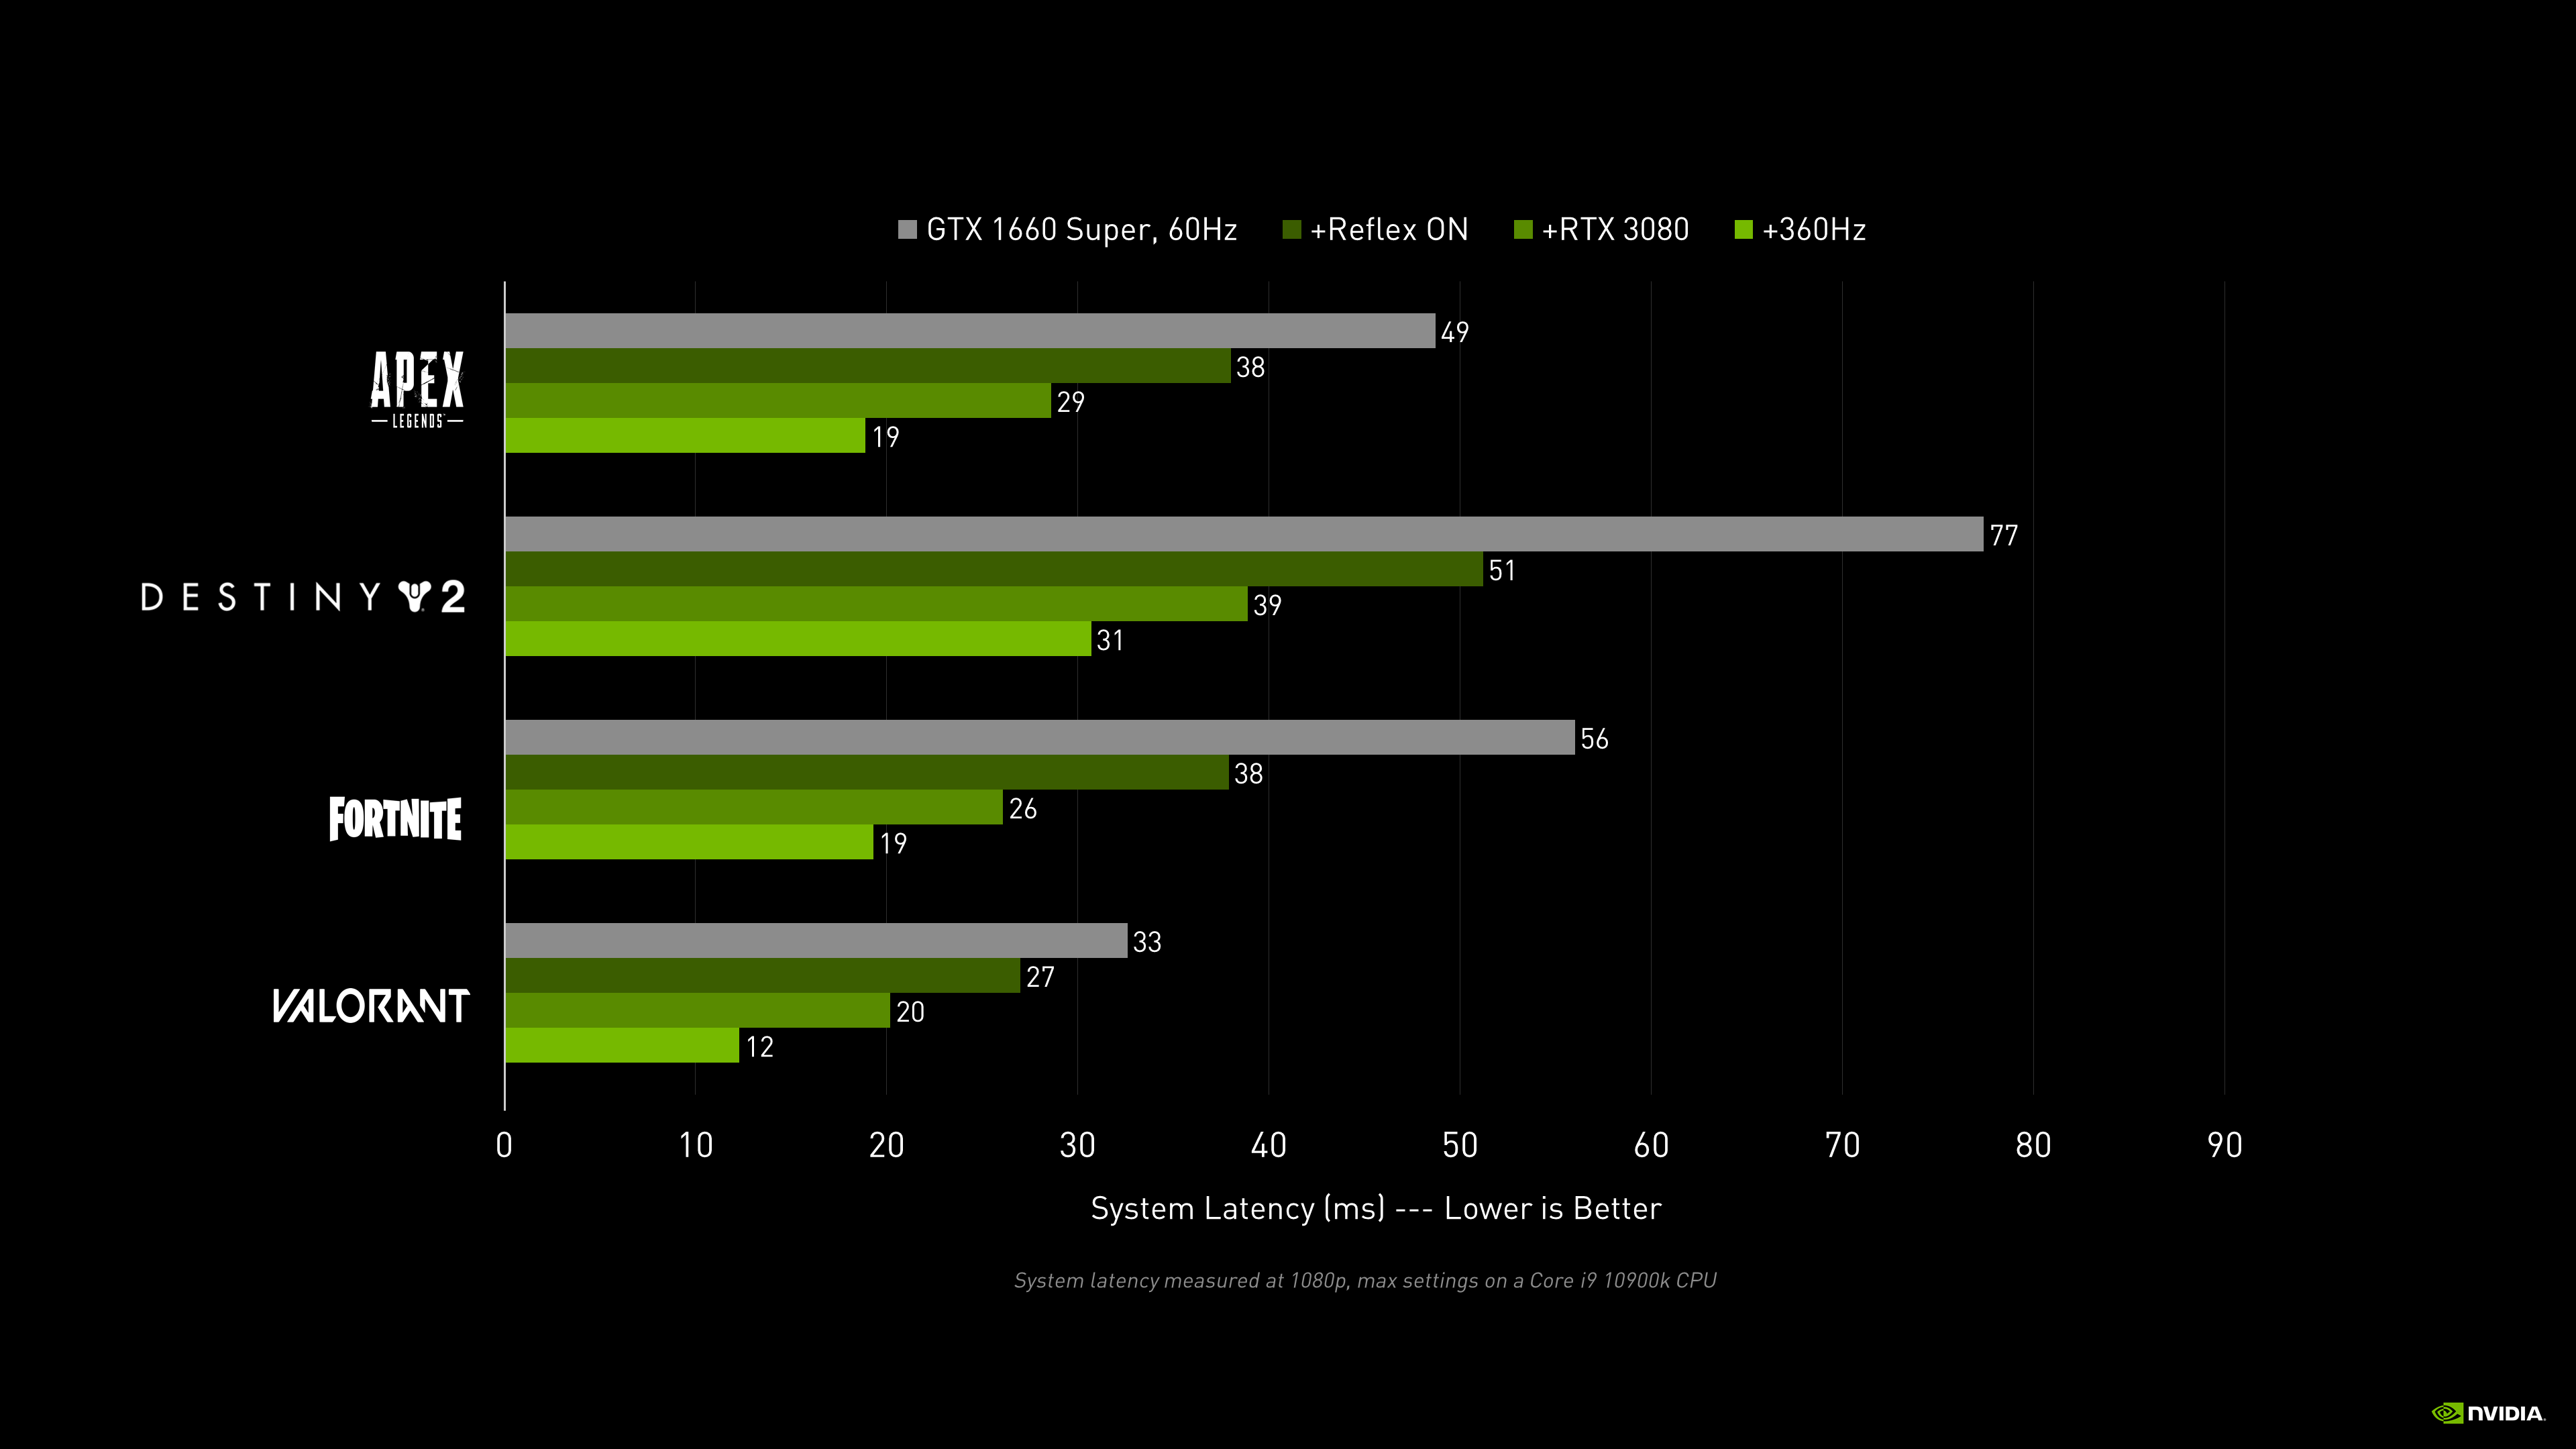 nvidia-reflex-system-latency-performance-chart.png